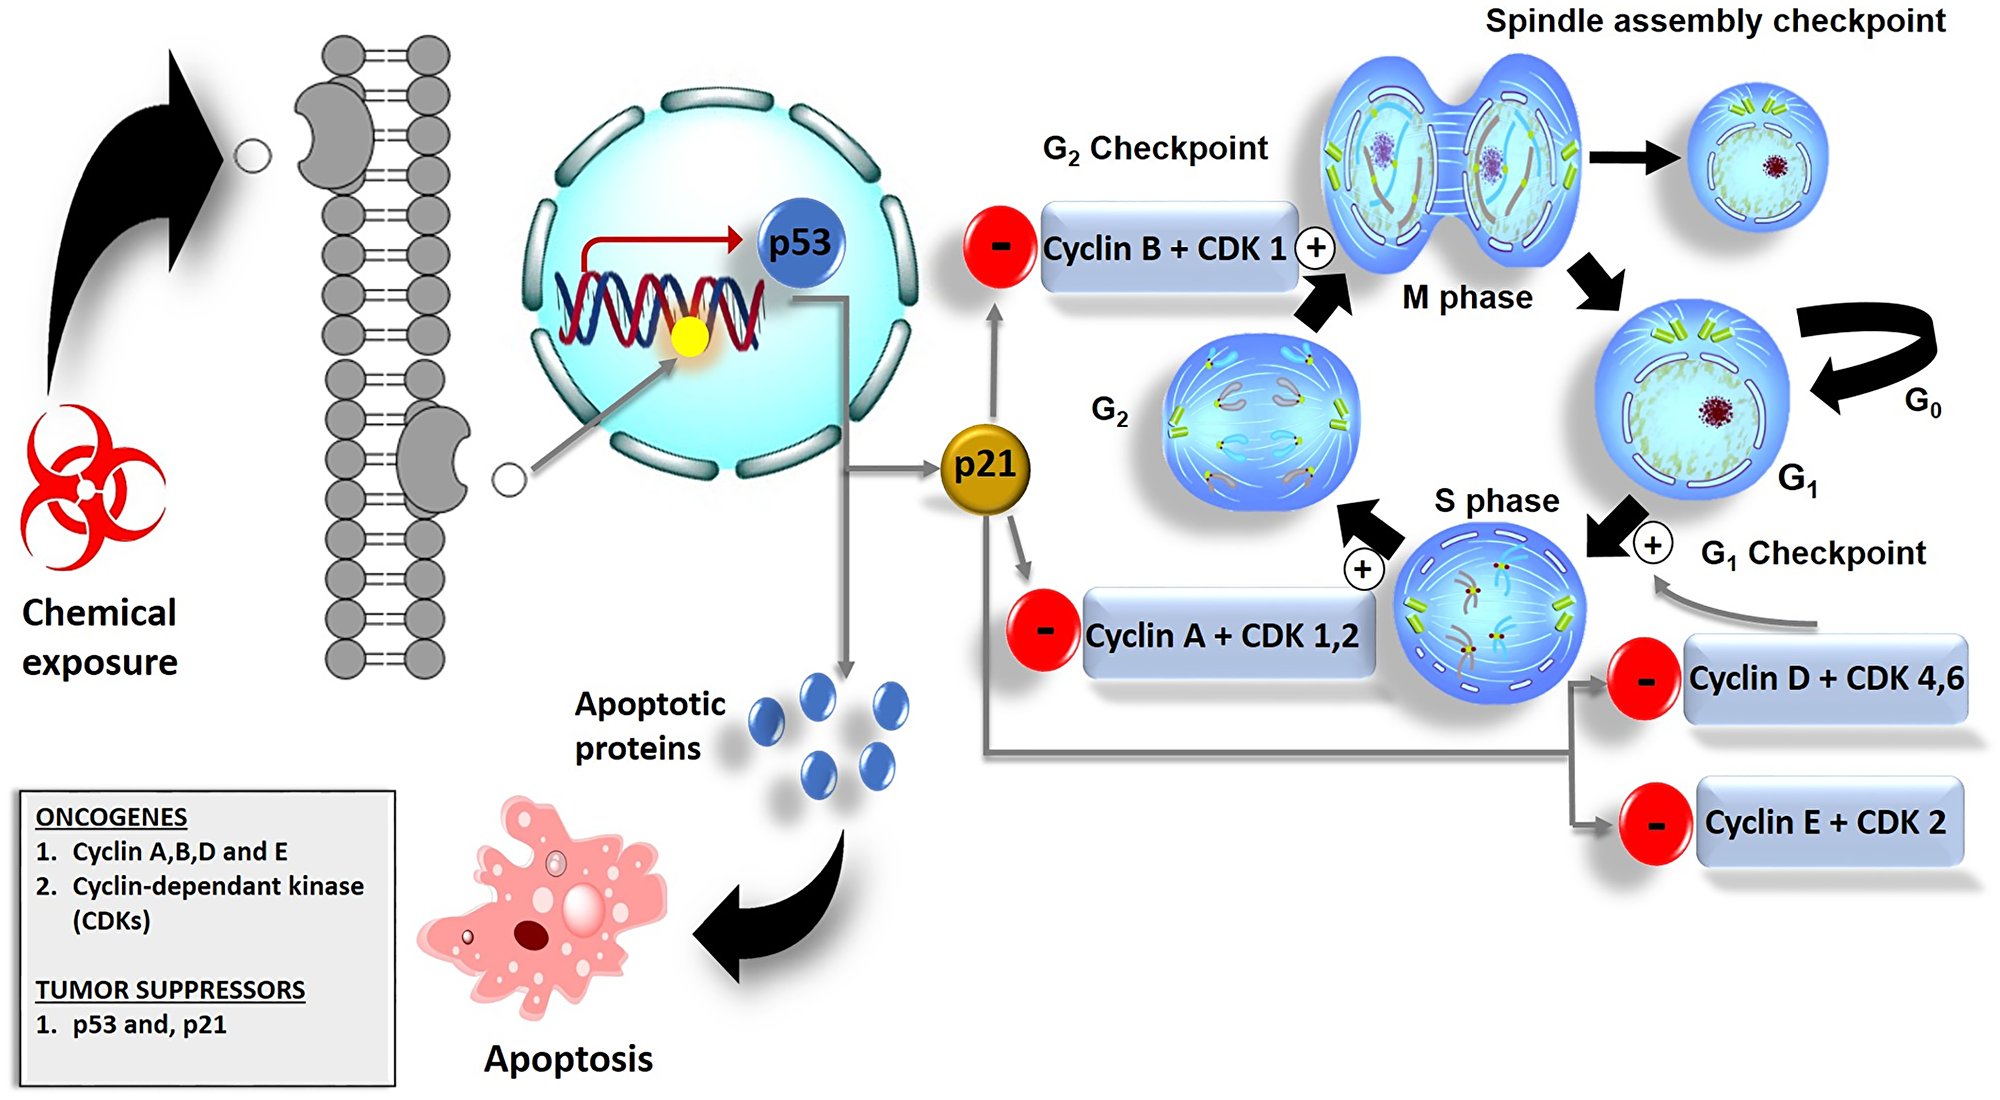 Figure 1 Cell cycle checkpoints and their role in cancer cell death. (Chota, 2021)